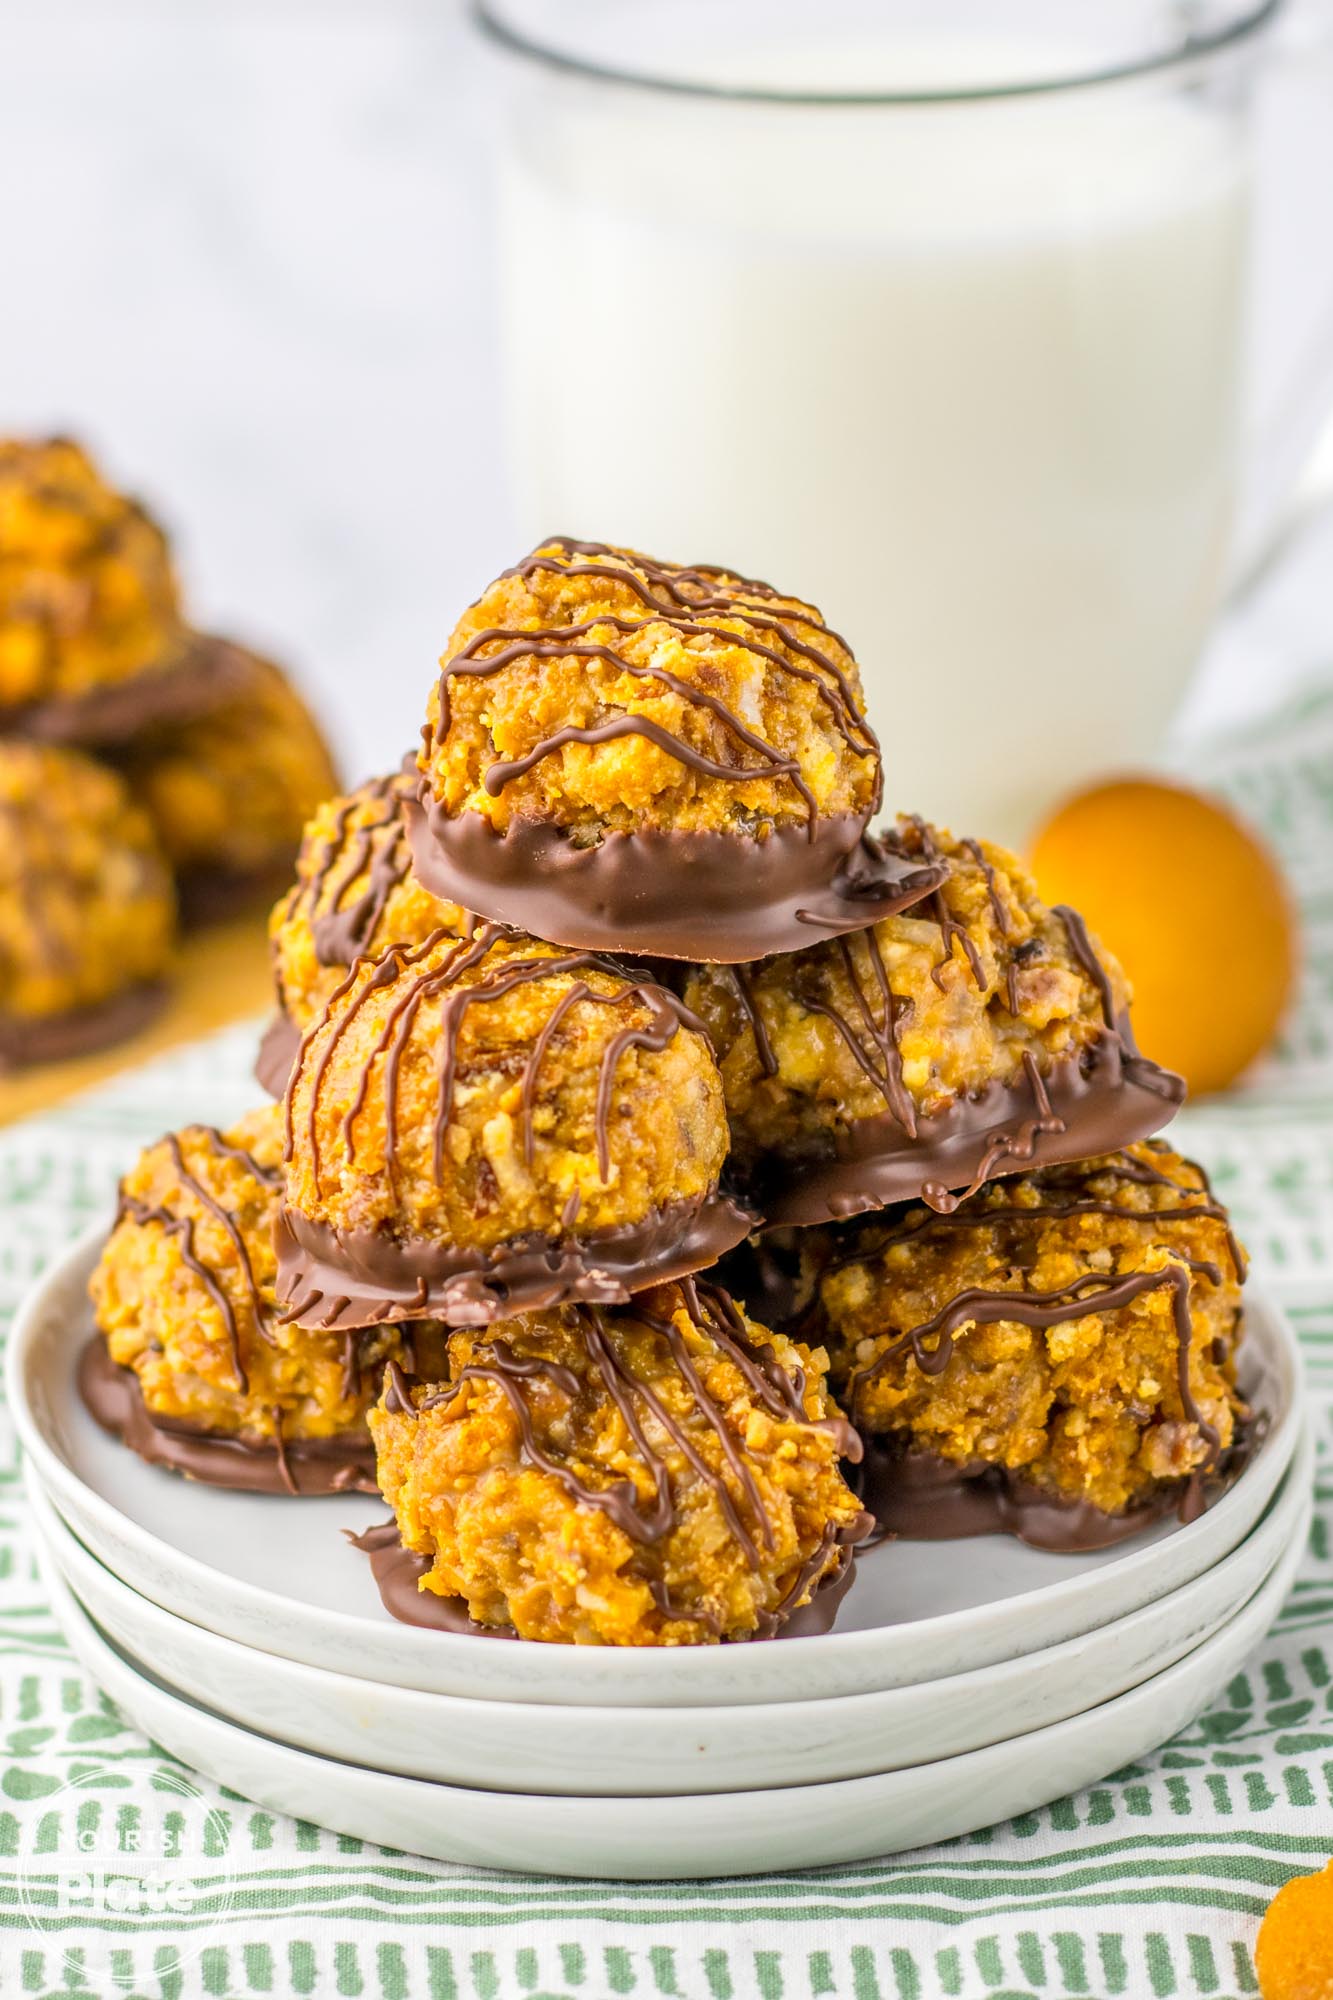 Stacked Samoas truffles on a white plate, with a glass of milk in the background